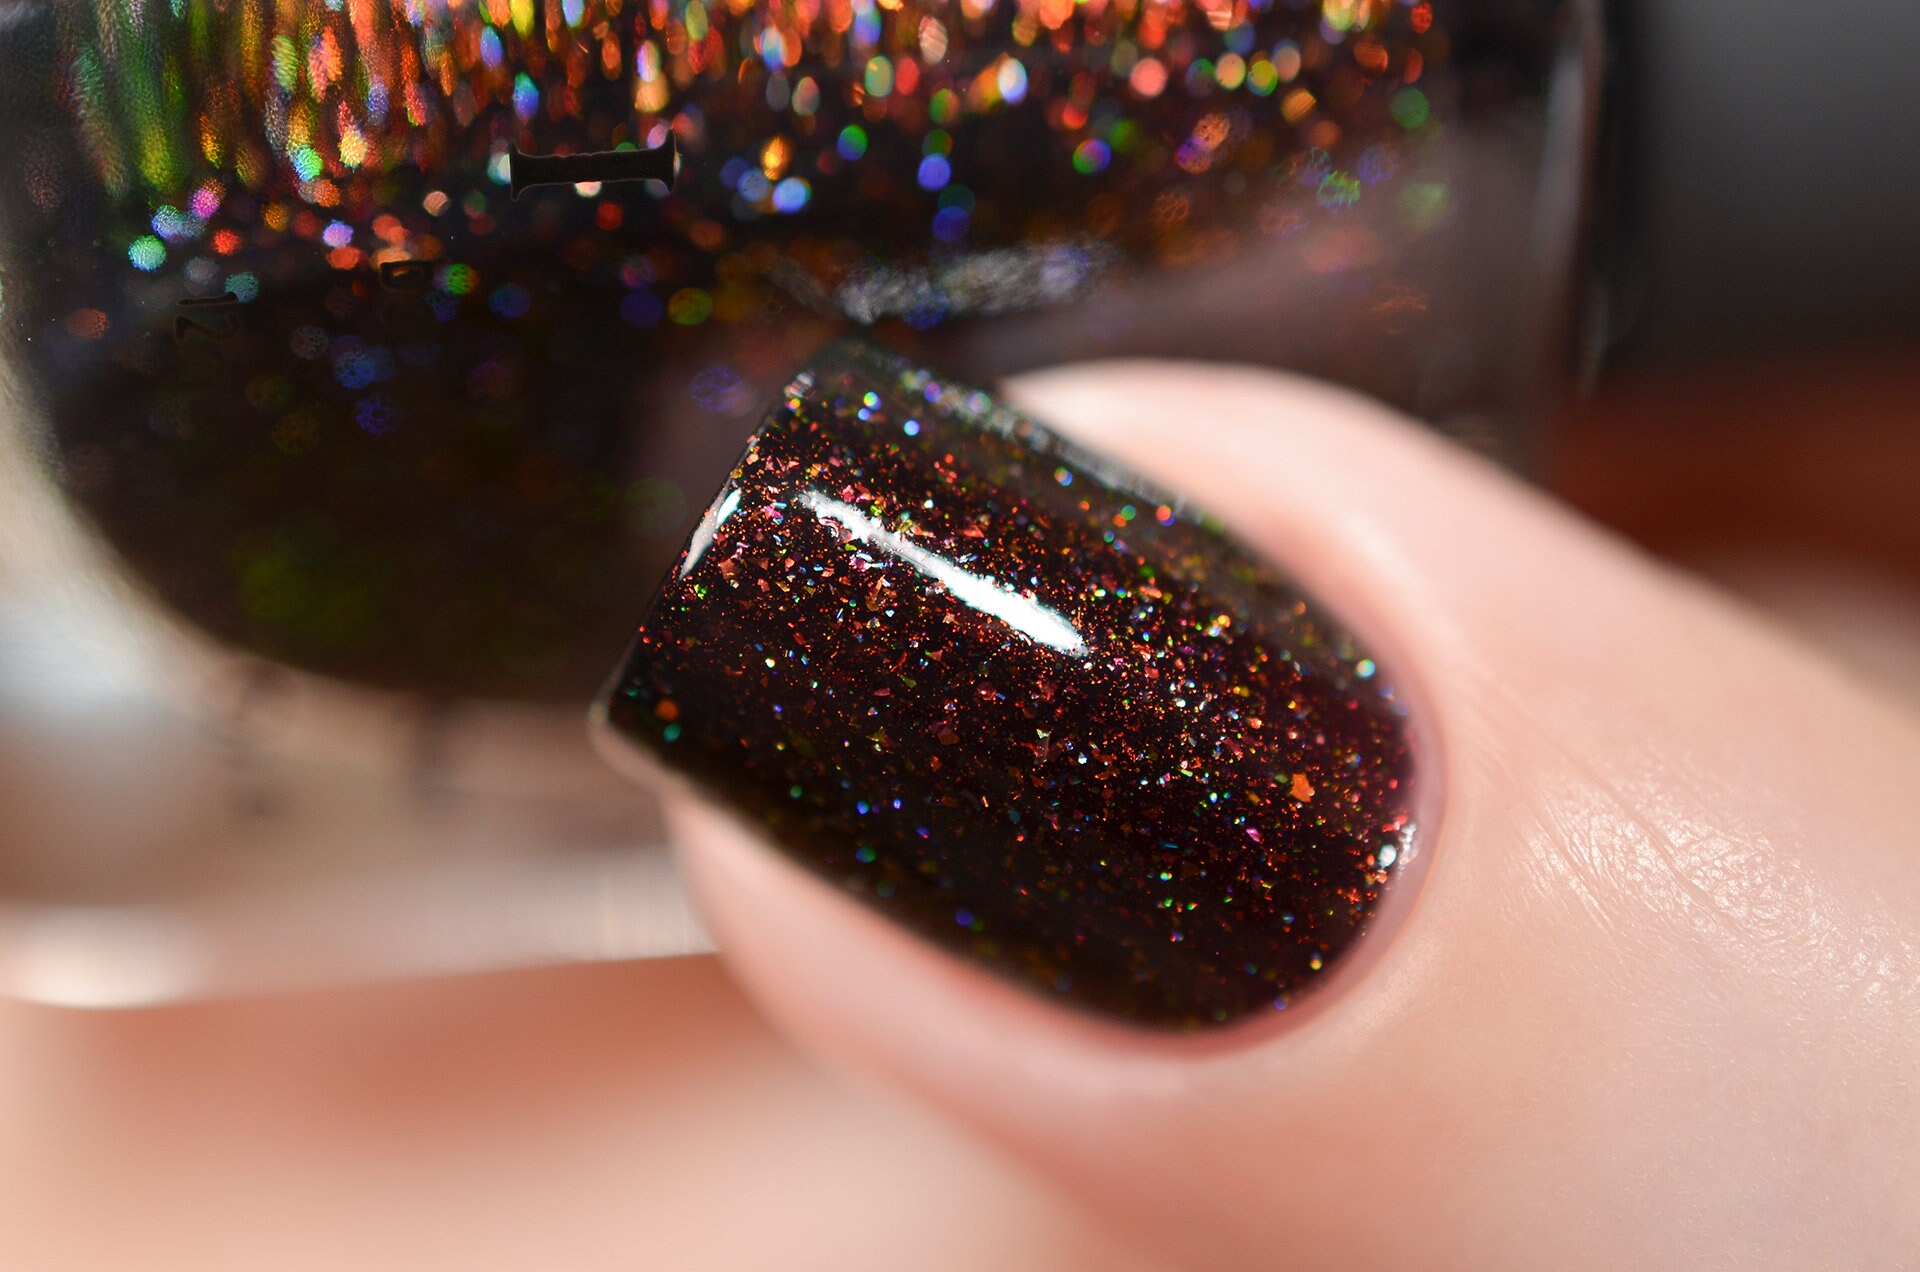 Black Nail Polish With Iridescent Glitter And Shimmer · Extract